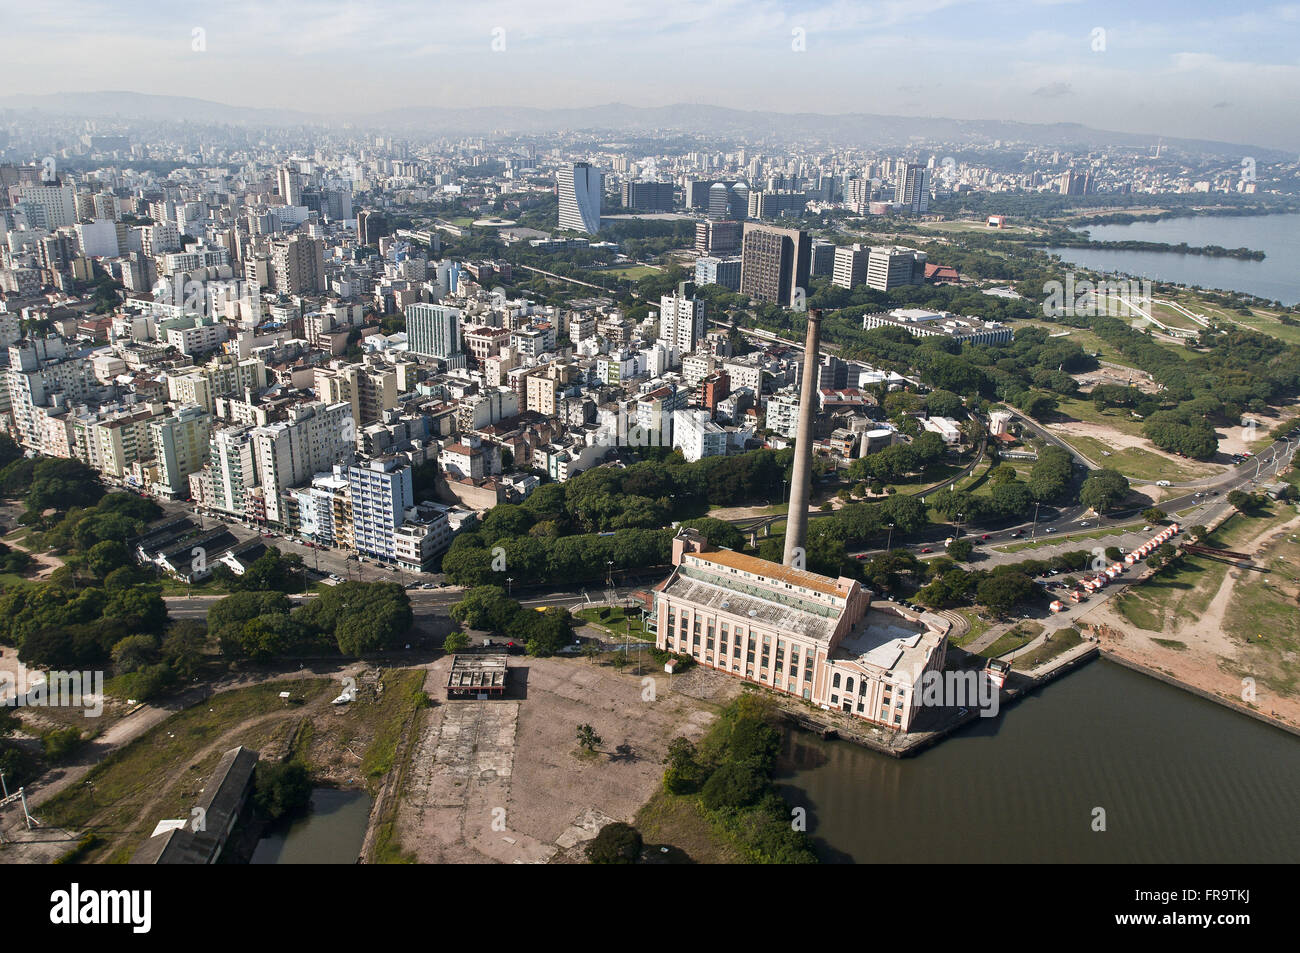 Aerial view of the city and the plant Gasometro Cultural Centre on the banks of the Rio Guaiba Stock Photo